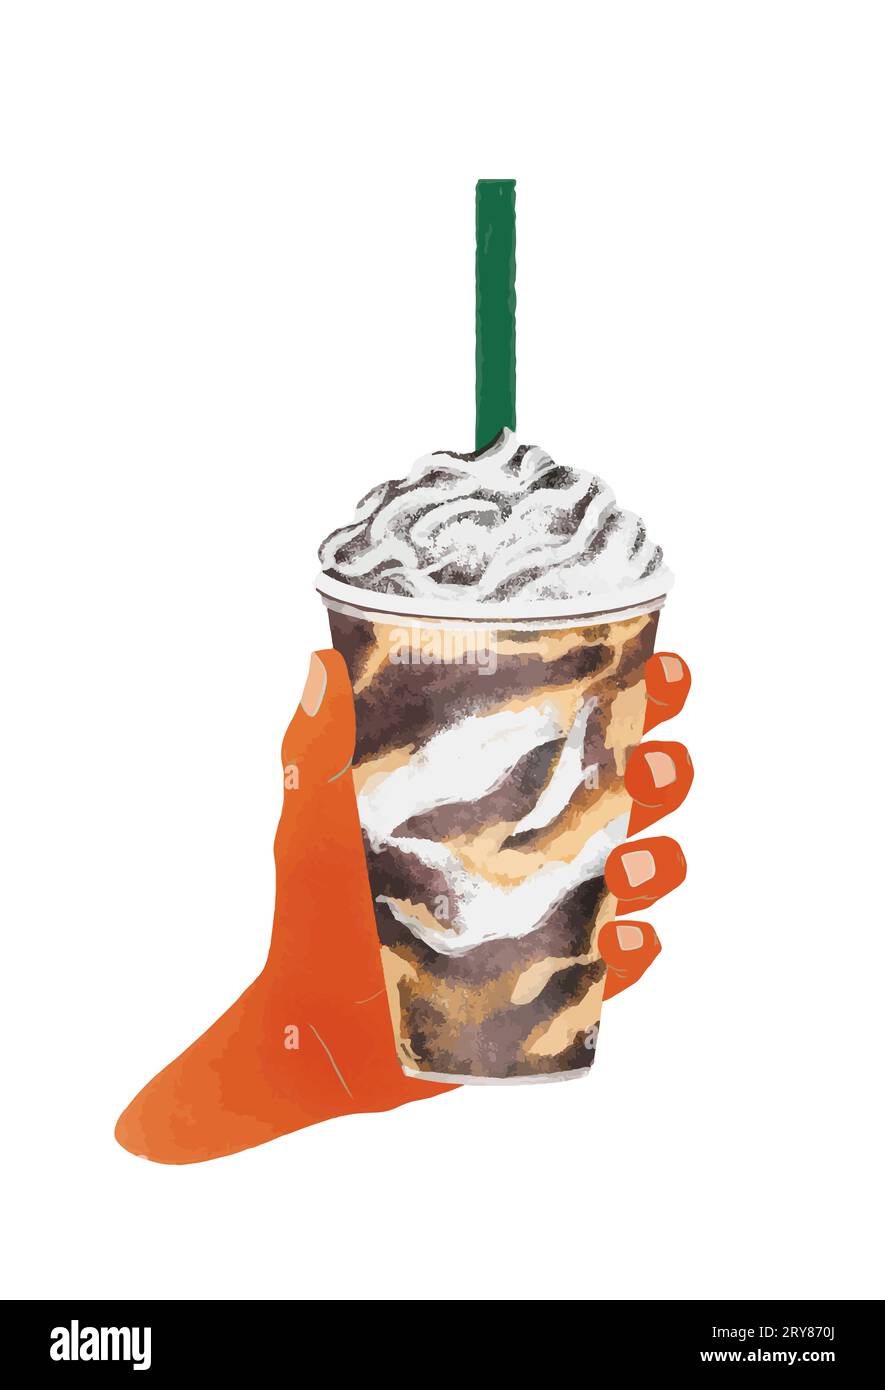 Vector illustration. Hand holding glass of frappuccino or iced coffee with cream and chocolate. Take away cup isolated on white background Stock Photo